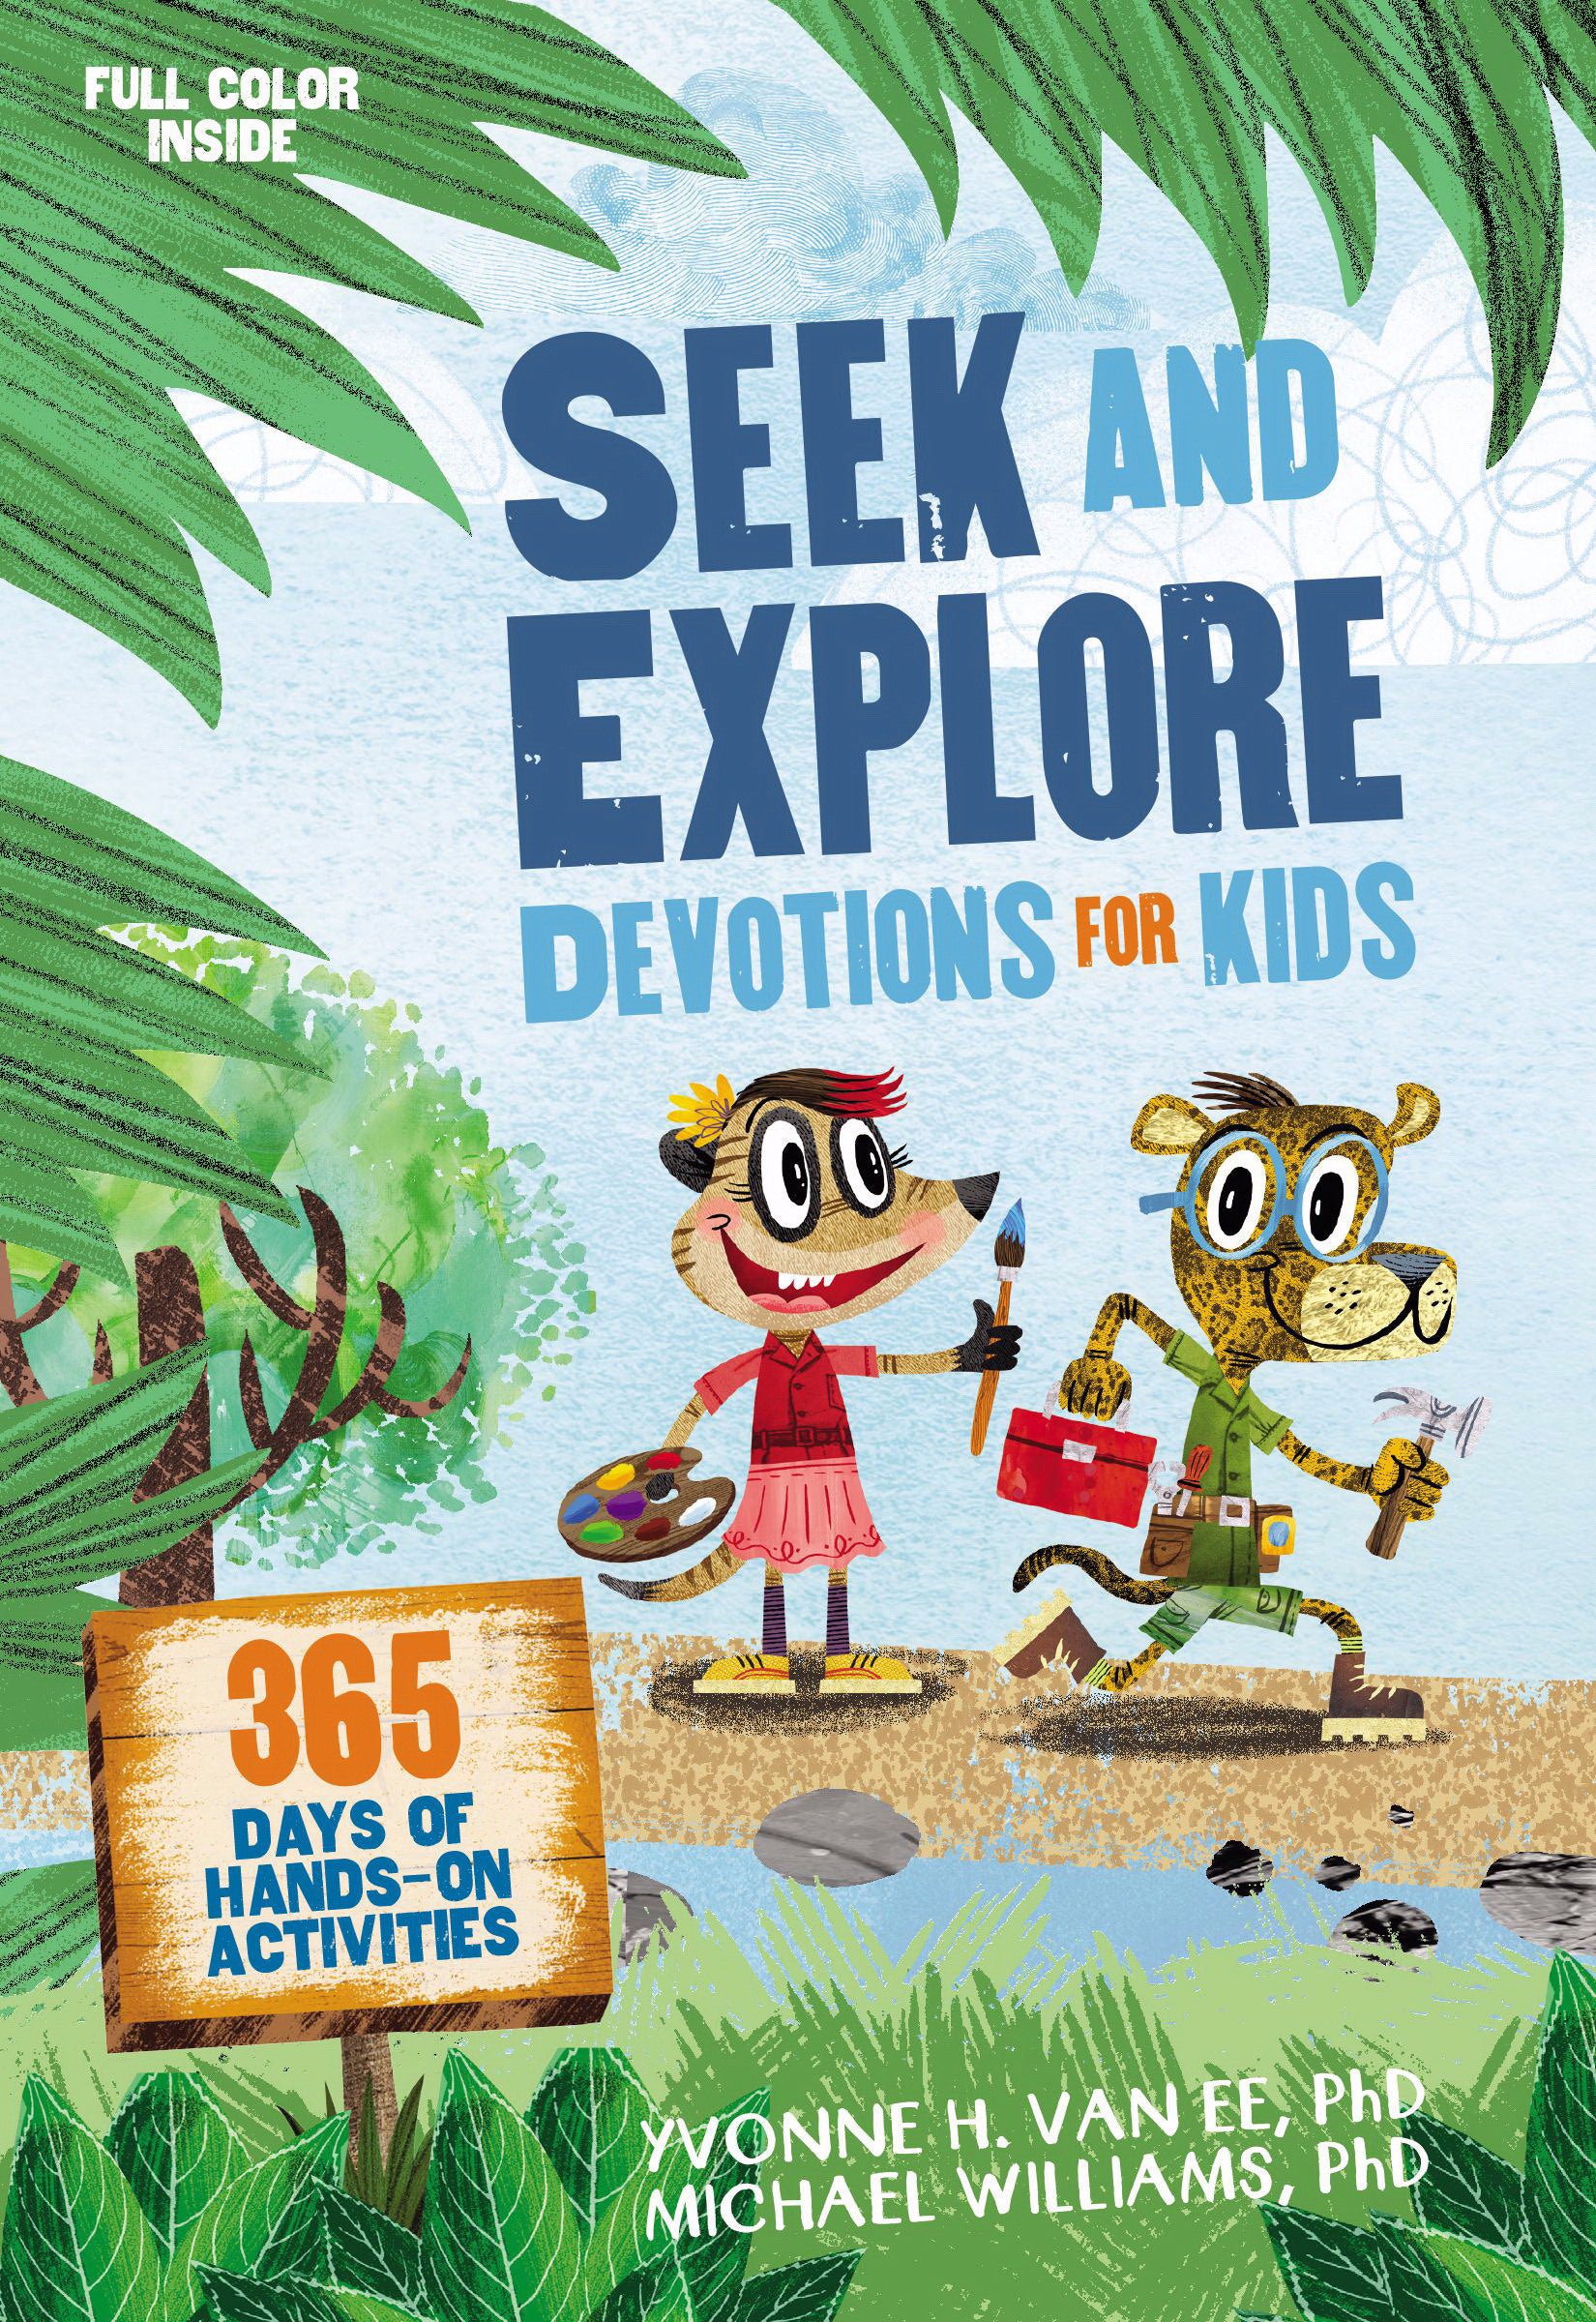 Image of Seek and Explore Devotions for Kids other